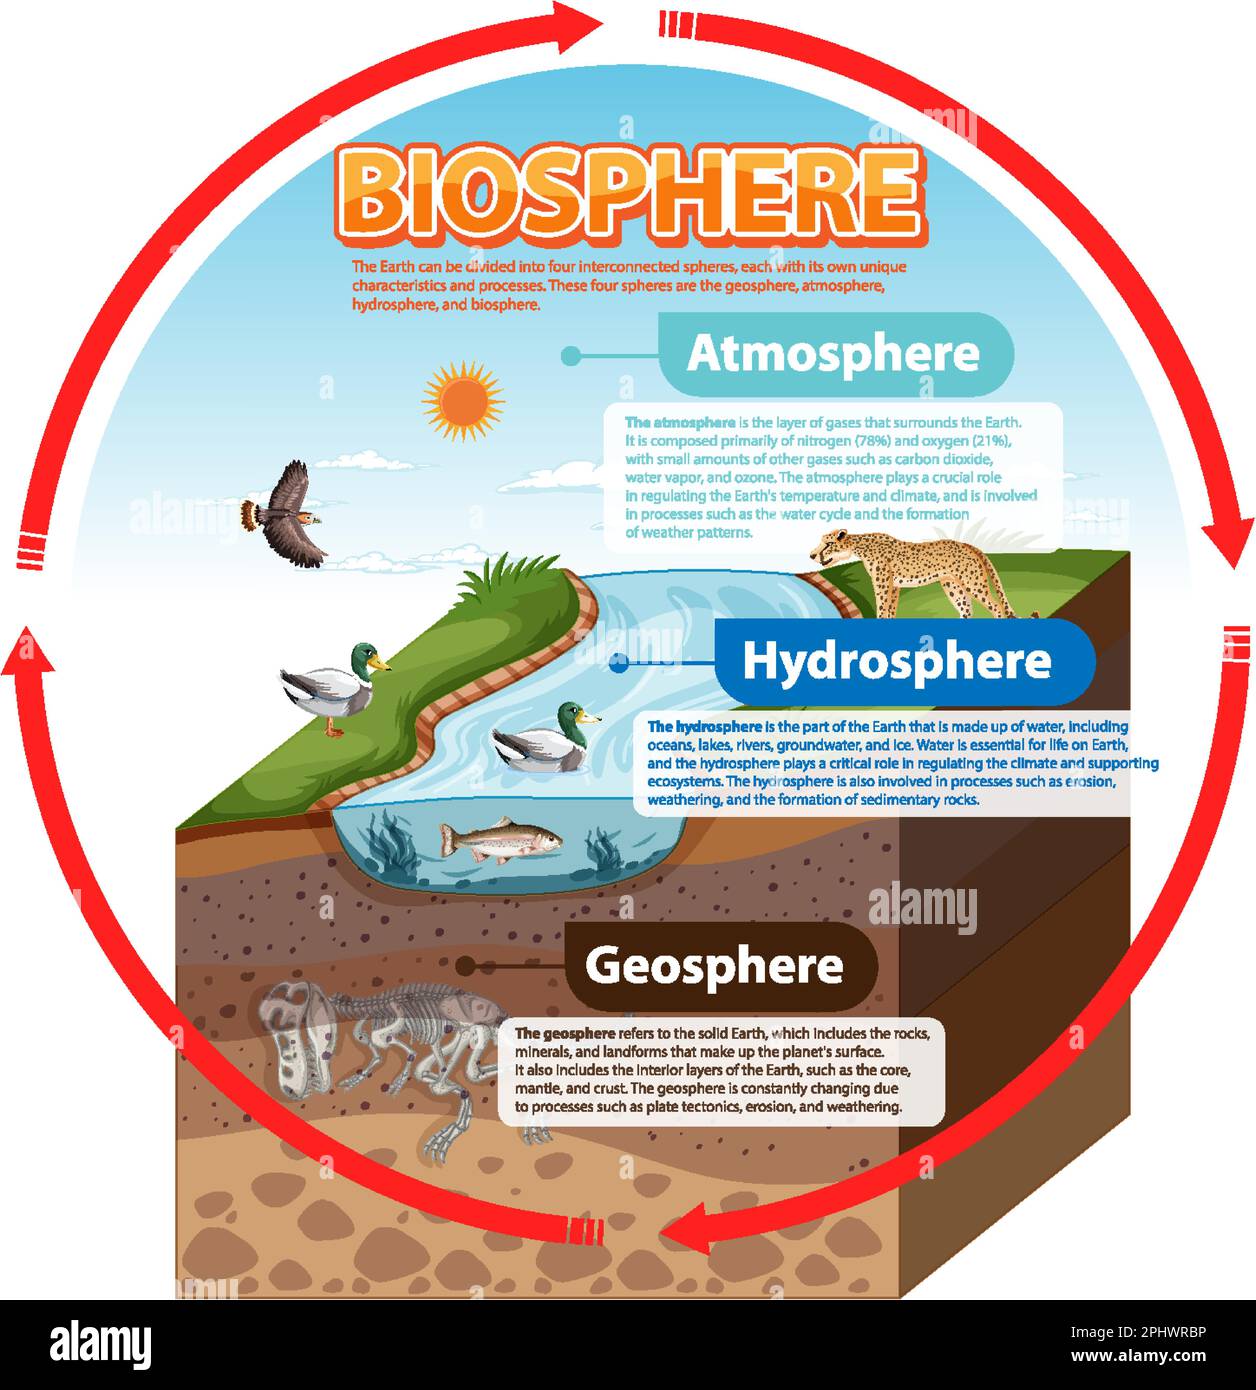 Whats the Biosphere? | Geothermal energy, Gravitational potential energy,  Energy facts